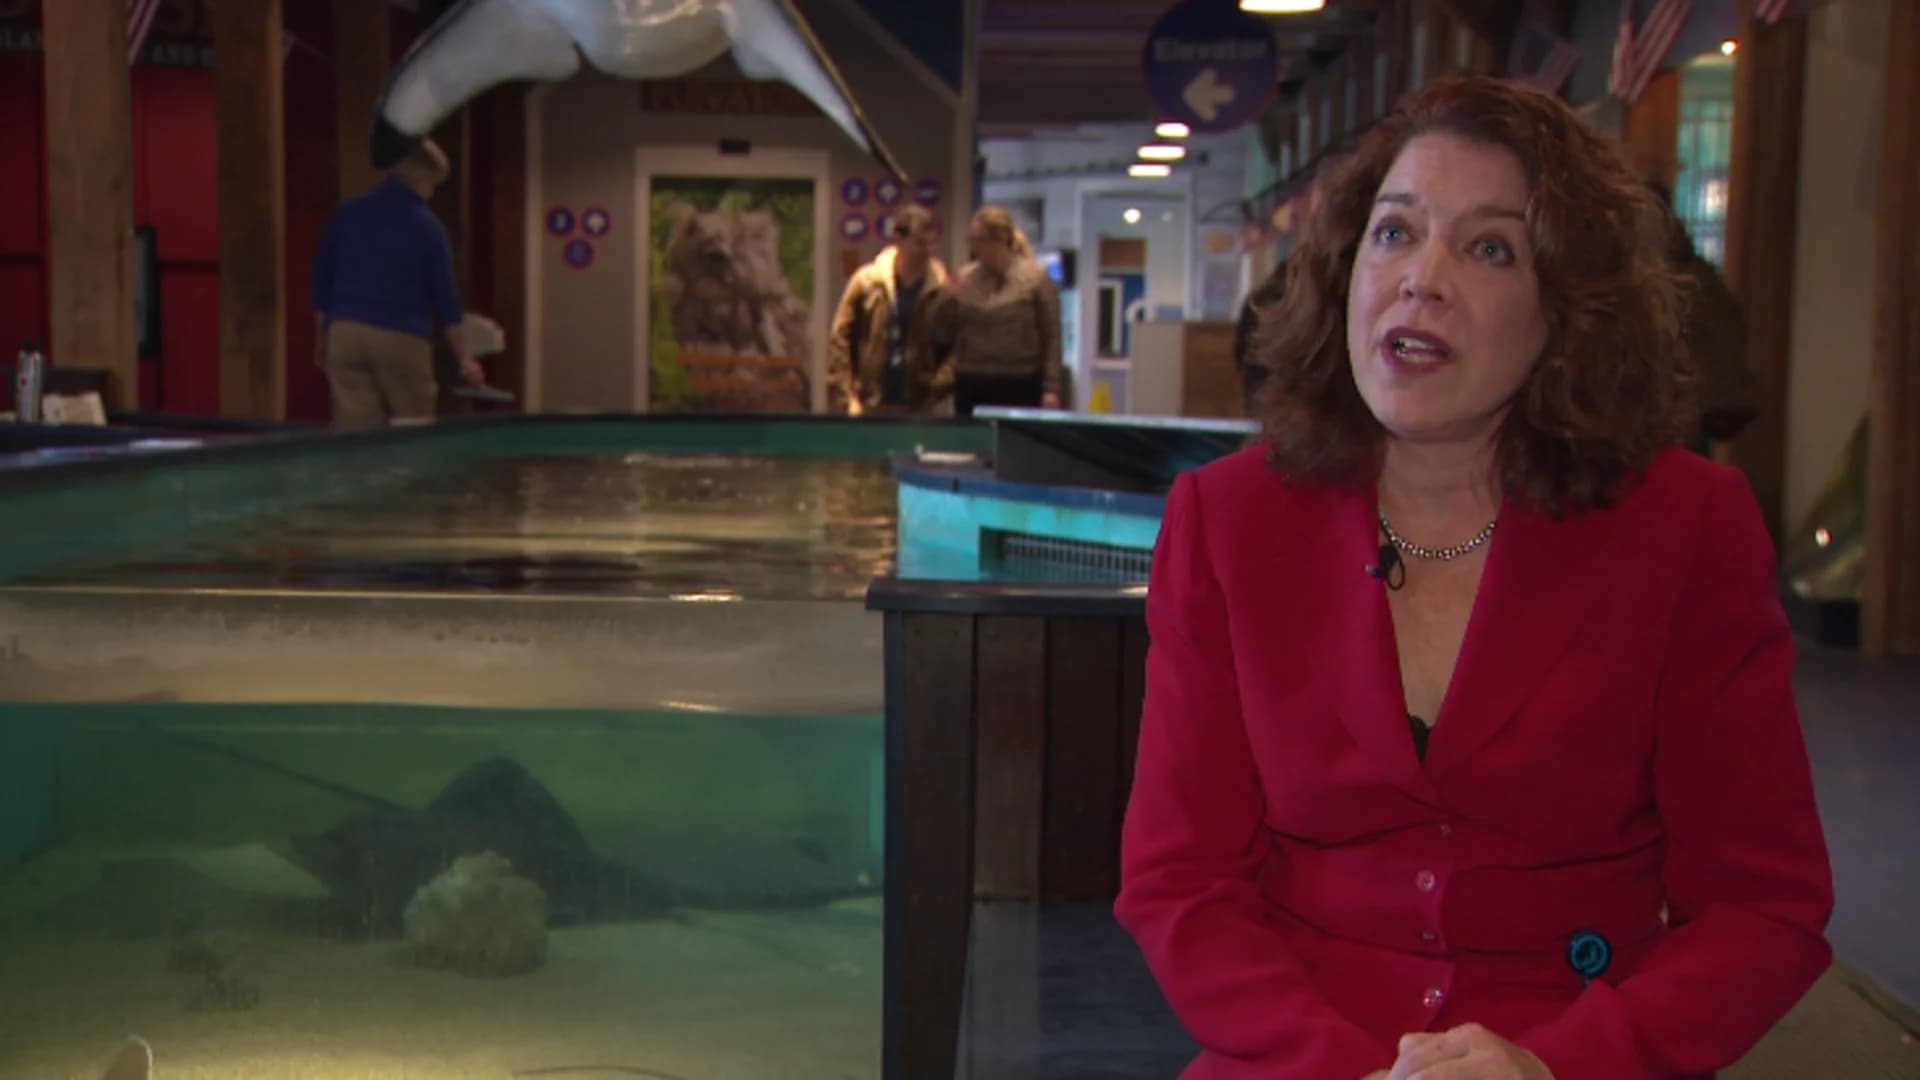 Maritime Aquarium president removed after only 3 months